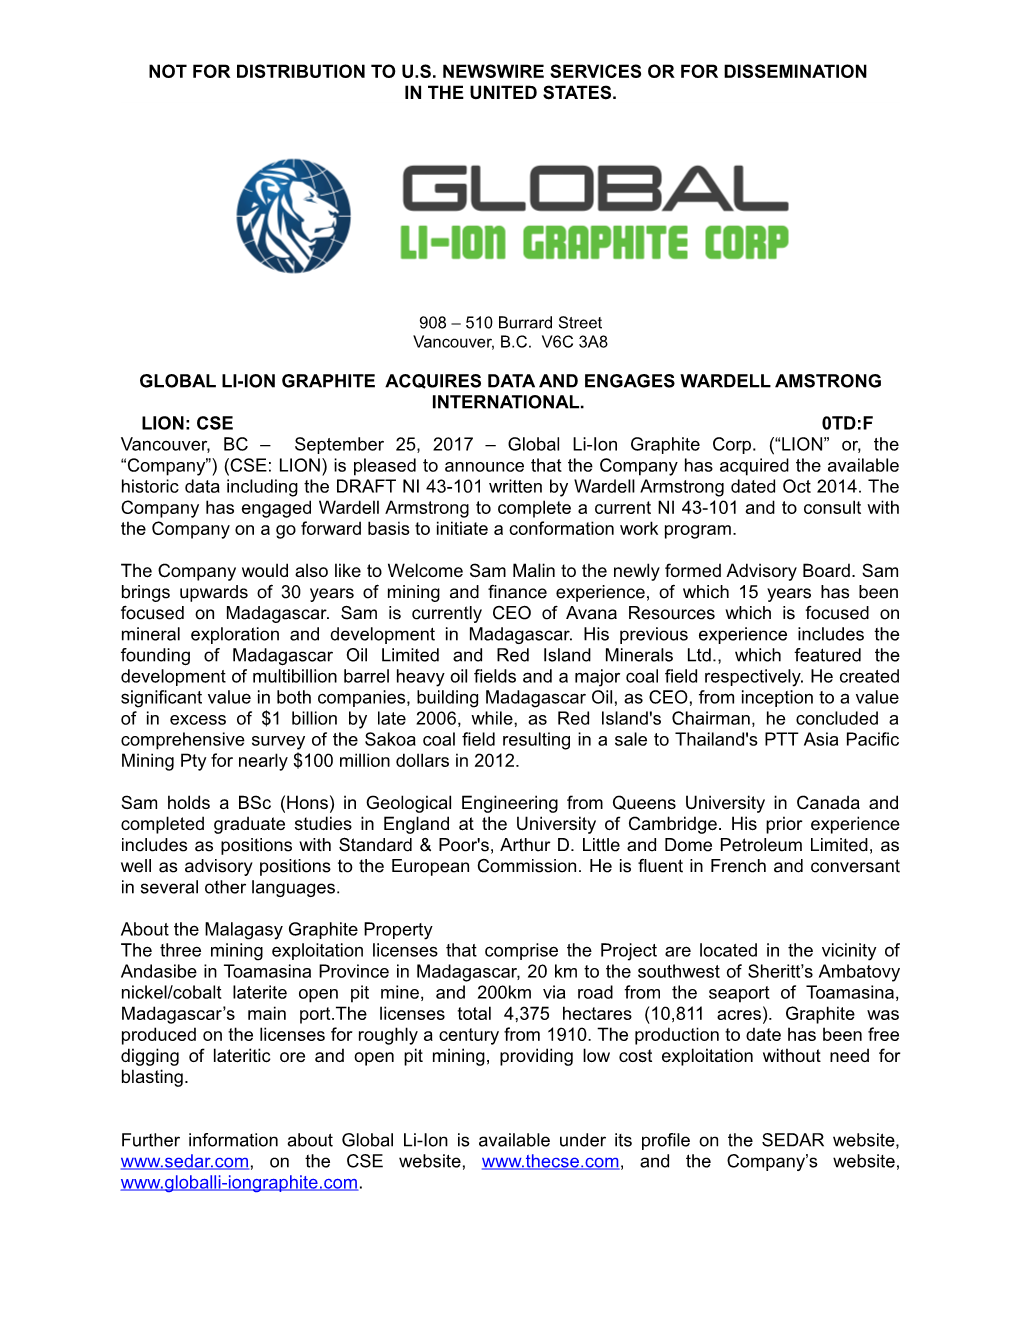 Global Li-Ion Graphite Acquiresdata and Engages Wardell Amstronginternational